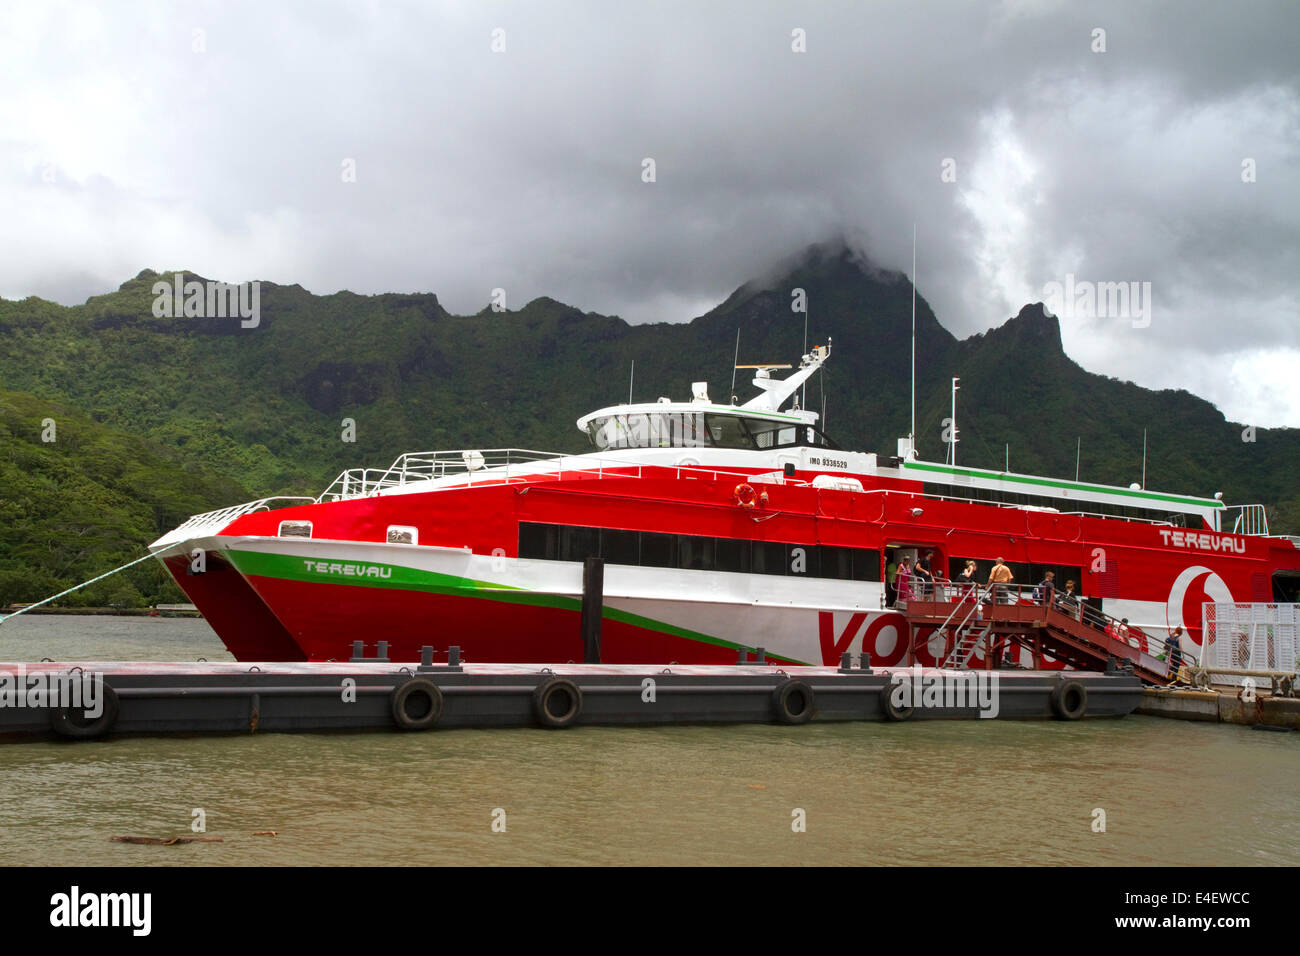 Terevau high speed ferry takes passengers between the islands of Tahiti and Moorea, French Polynesia. Stock Photo